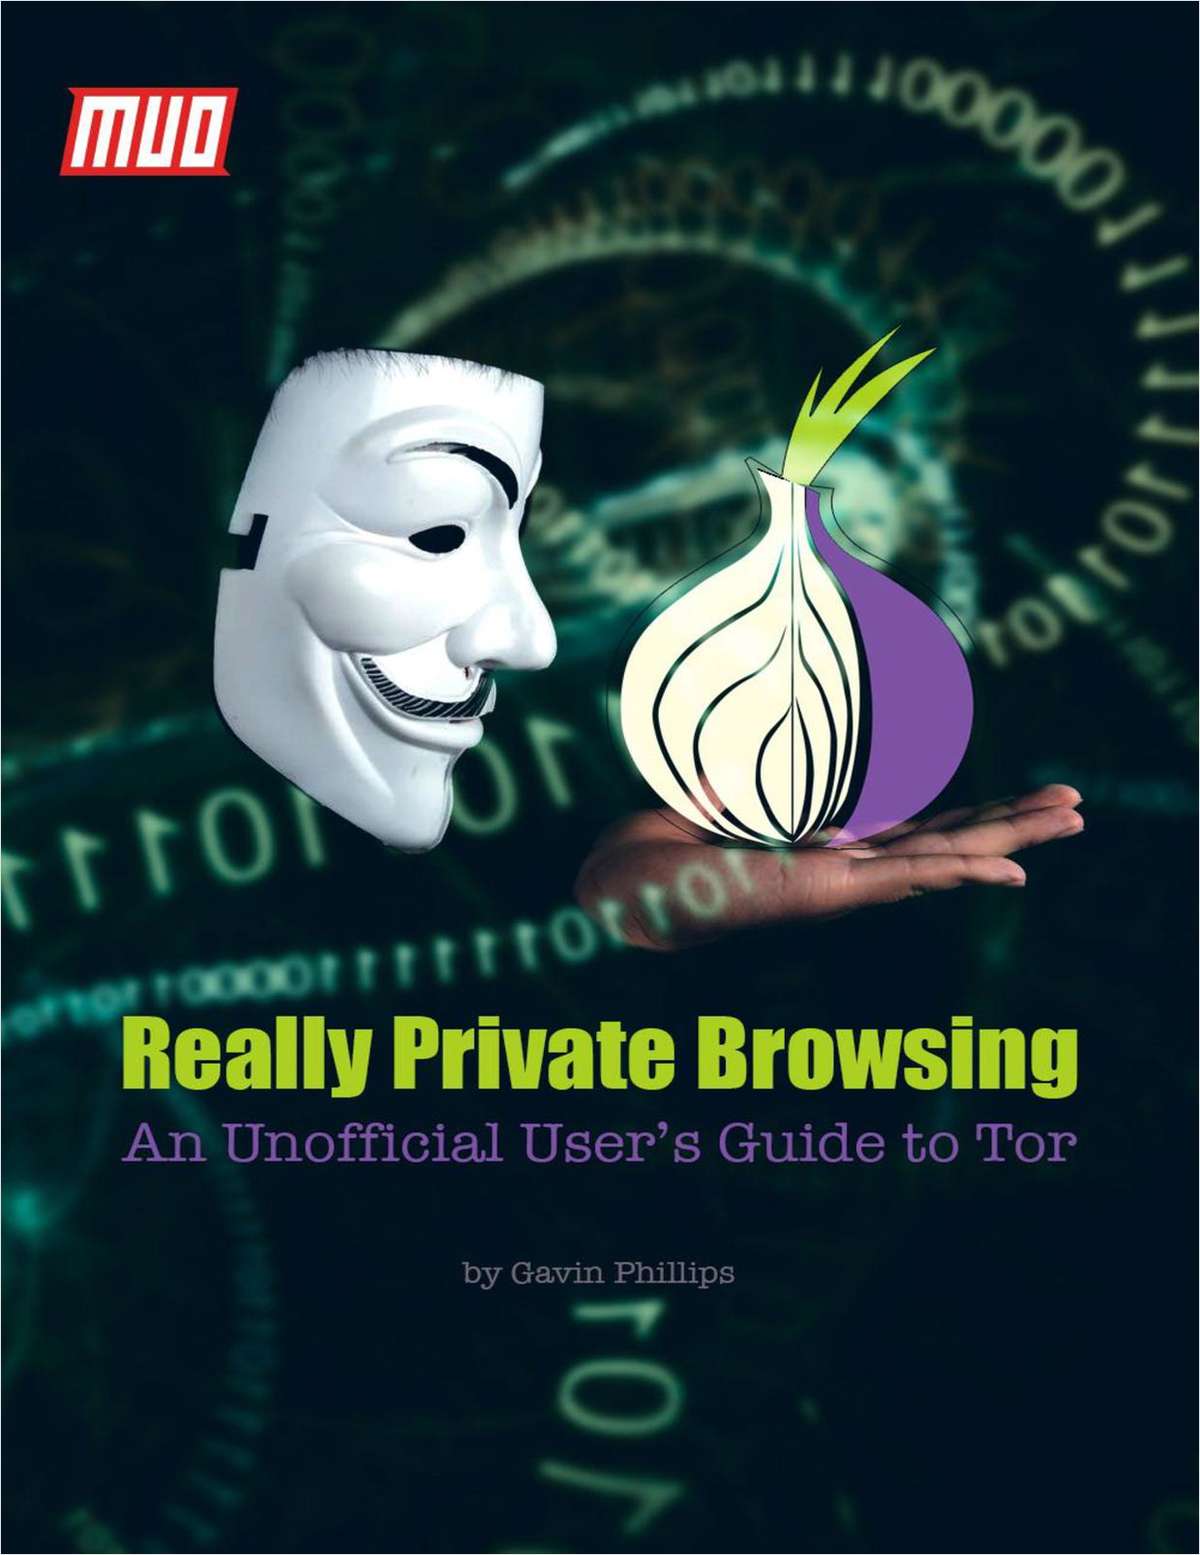 Really Private Browsing: An Unofficial User's Guide to Tor